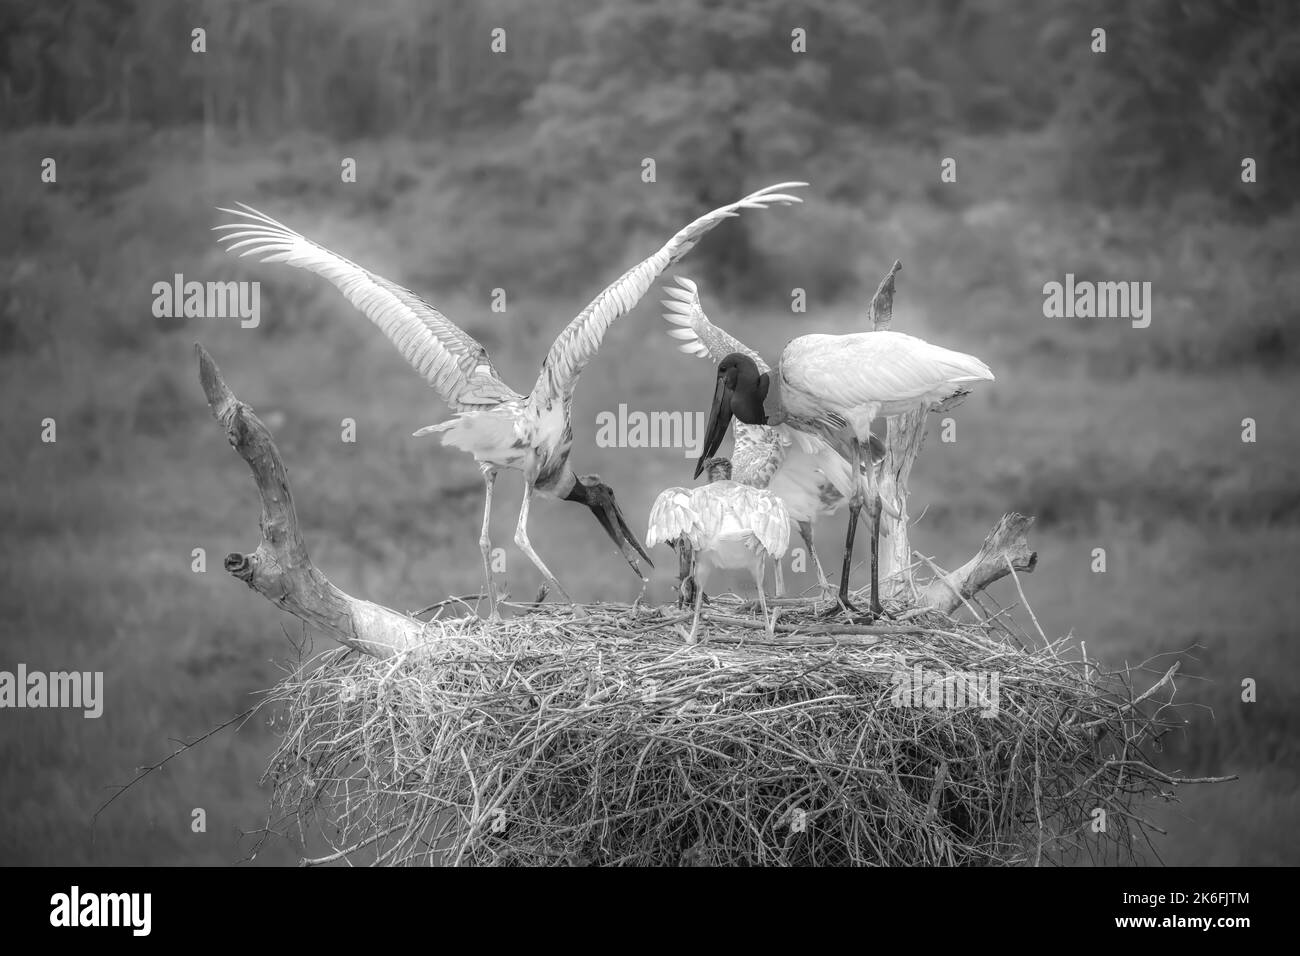 Black and white image of Jabiru storks on a nest -adult and young - feeding Stock Photo